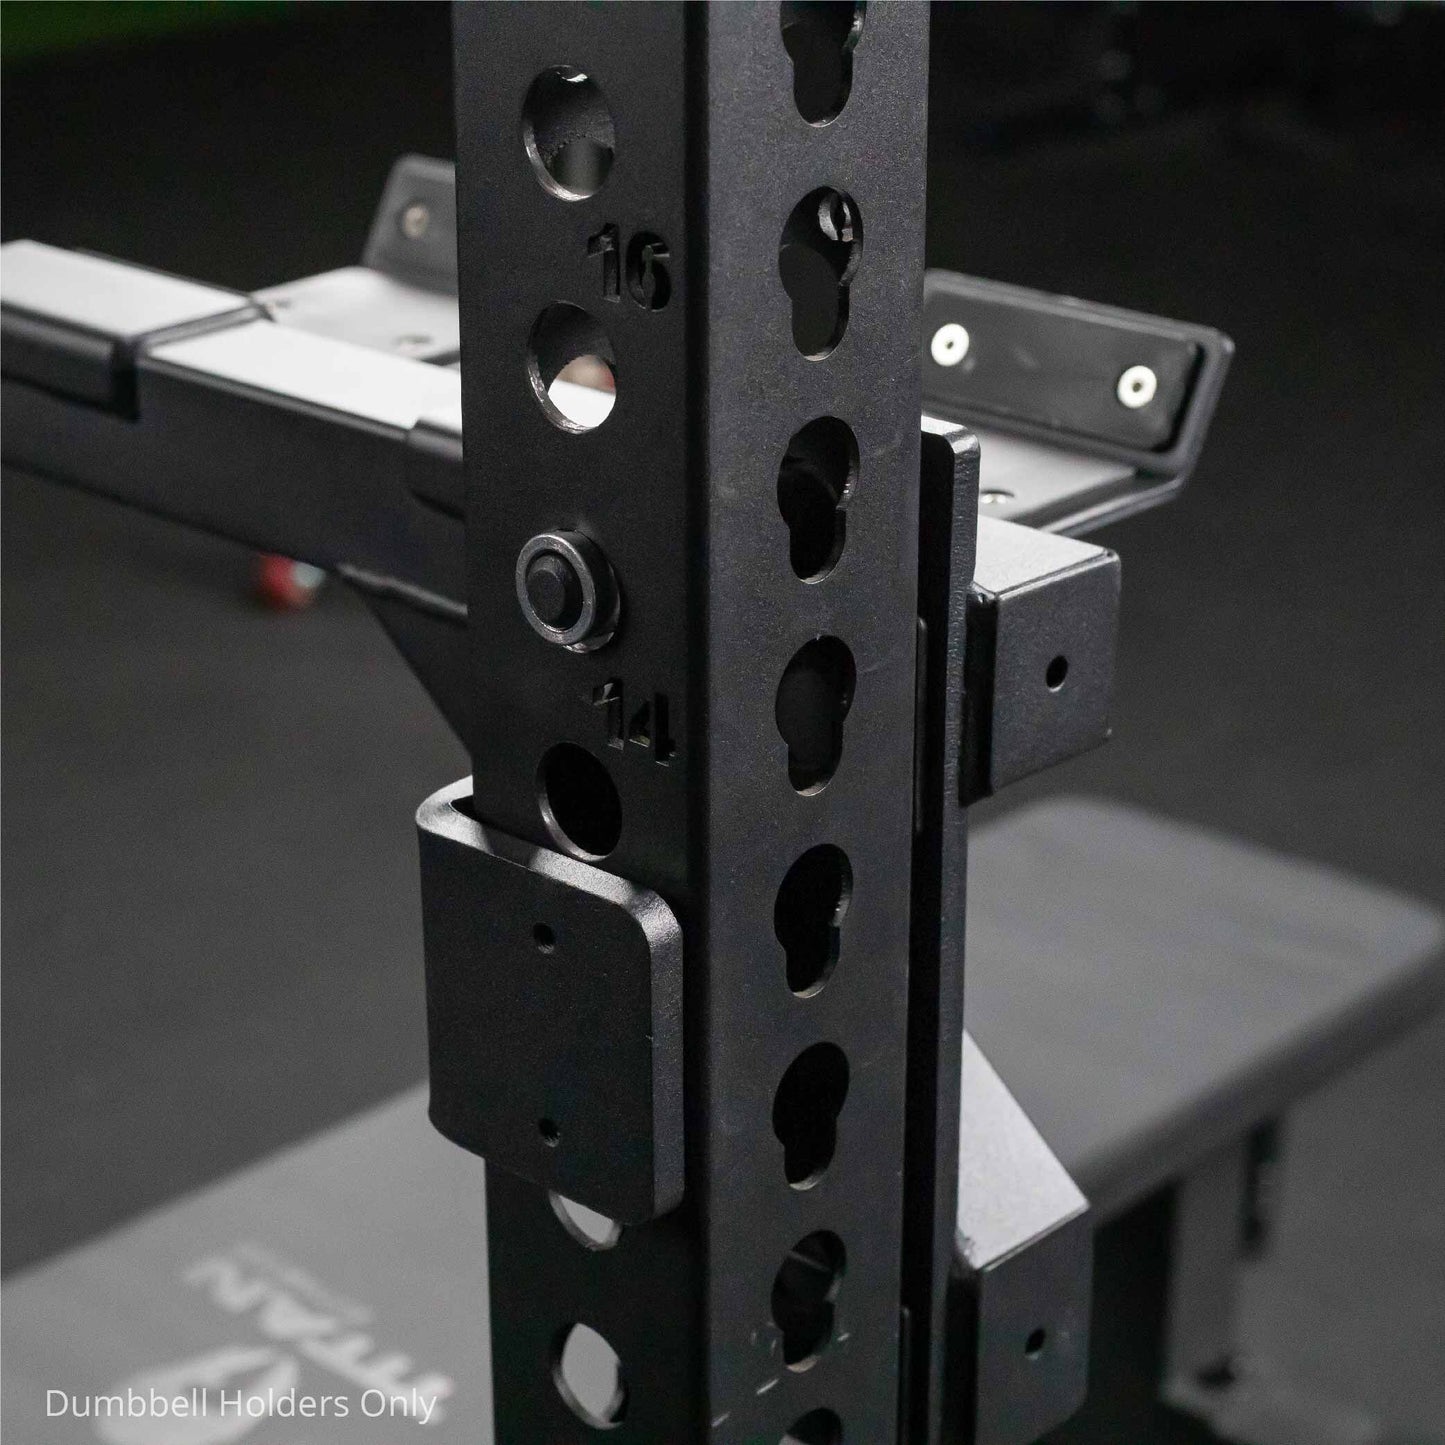 X-3 or TITAN Series Dumbbell Holders - view 8